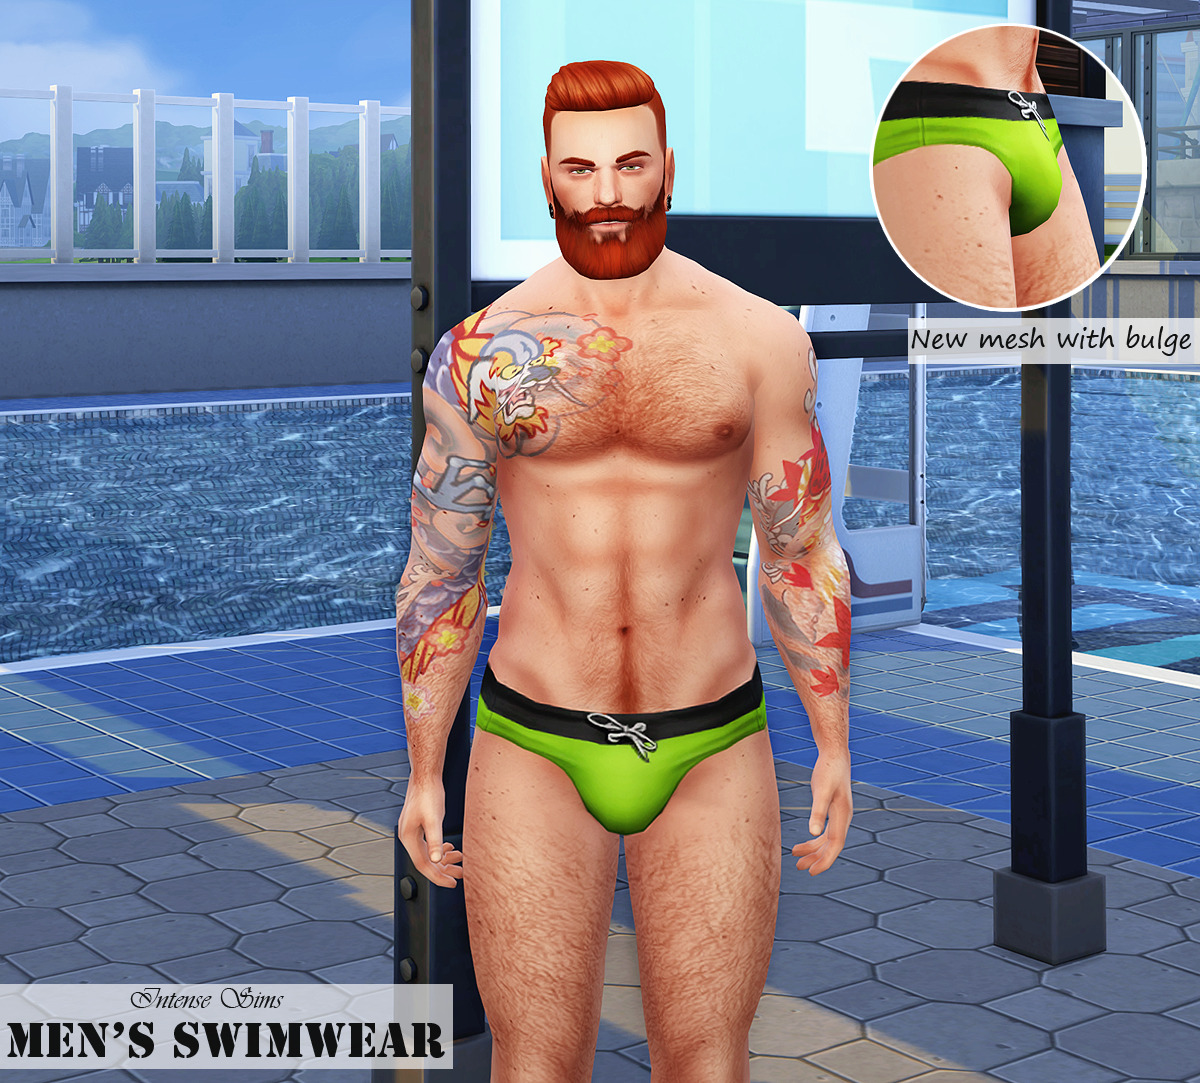 Chobits Sims — intensesims: Hi simmers, a new speedo for ur...